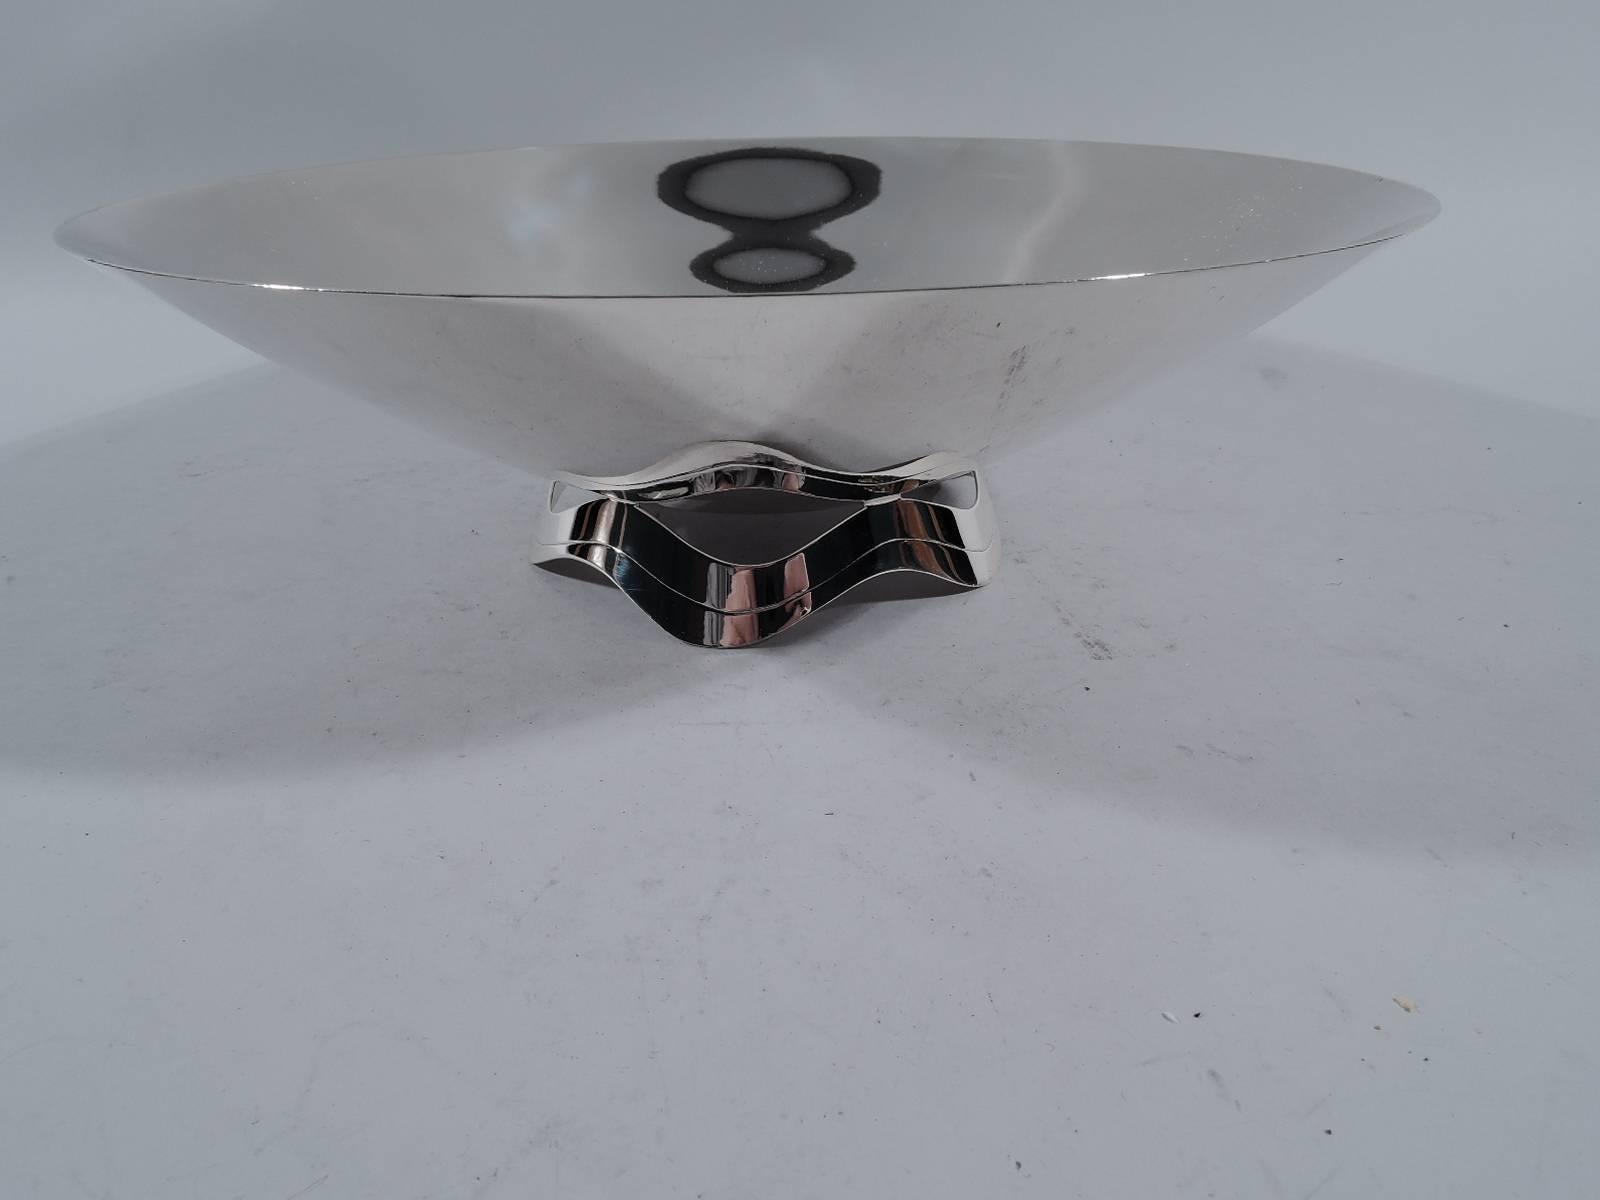 Mid-Century Modern sterling silver centerpiece bowl. Made by Tiffany & Co. in New York. Shallow bowl mounted to scrolled and open ribbon support. The support is reflected in the bowl – a witty example of reflection as a design element. Hallmark